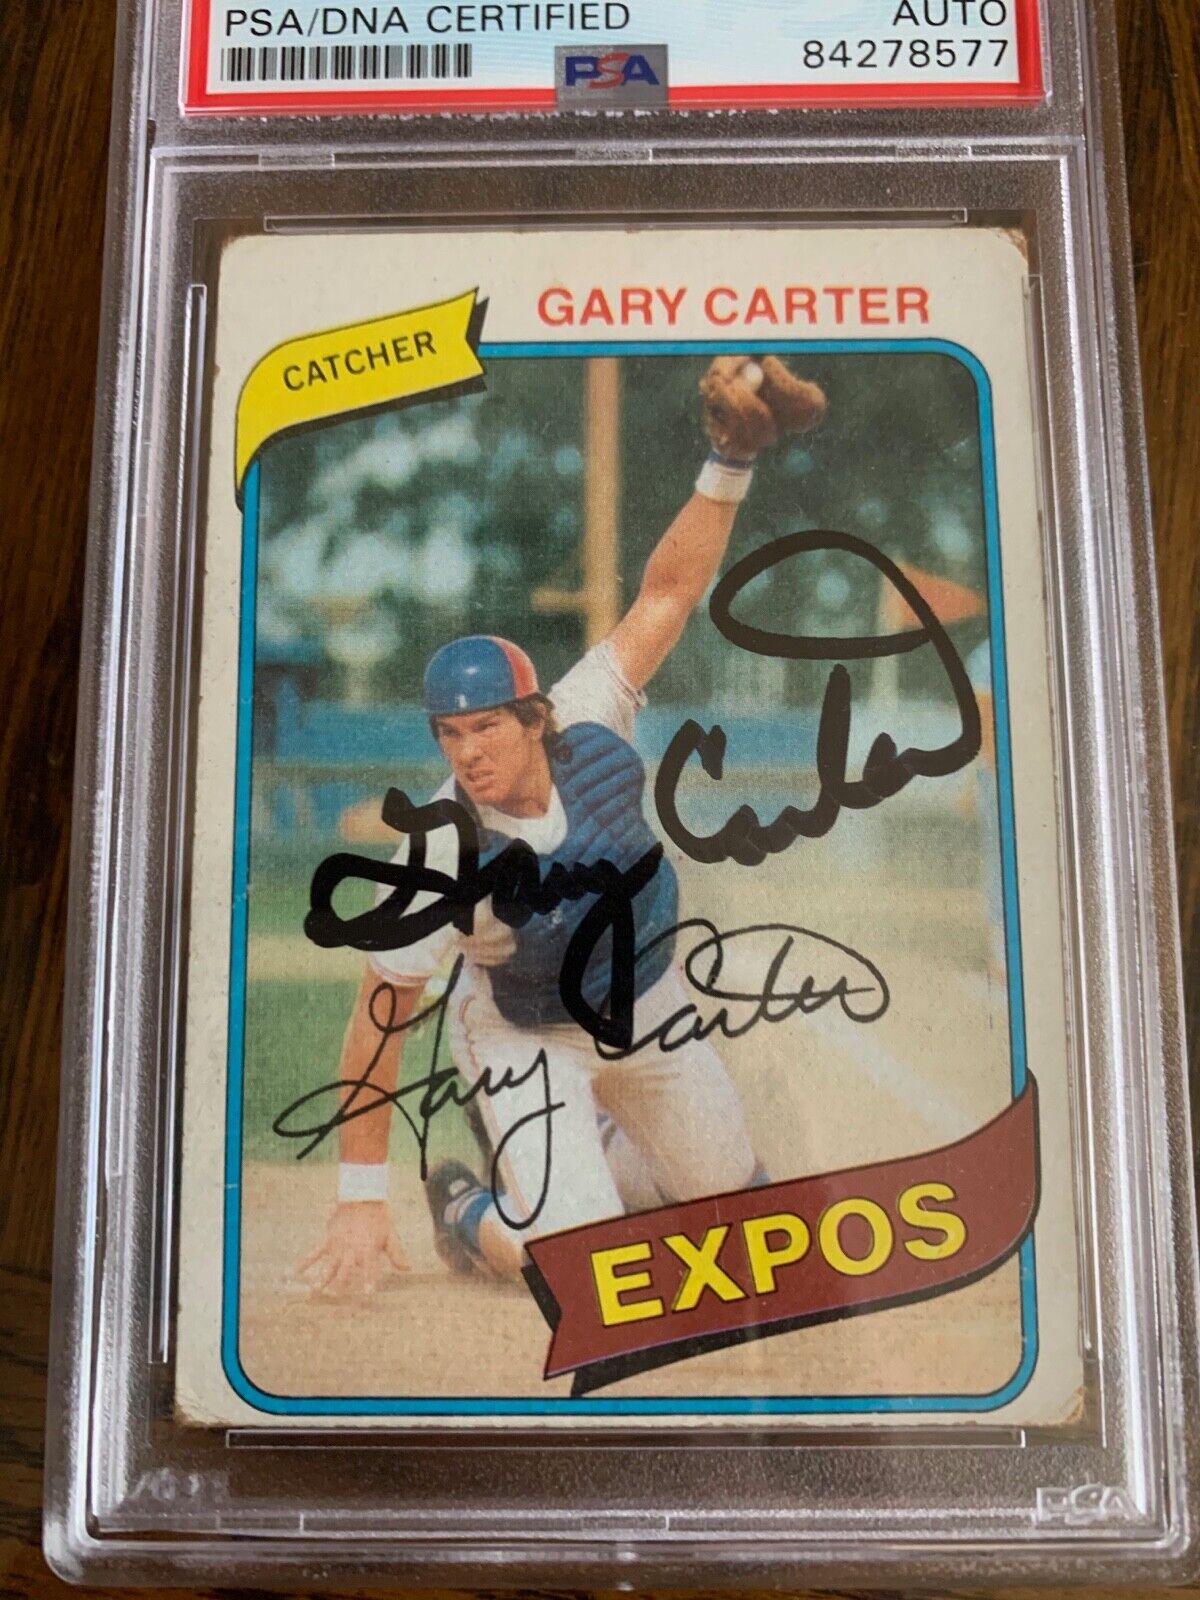 Gary Carter Autographed Signed 1980 Topps Card 70 PSA Slabbed Certified MLB